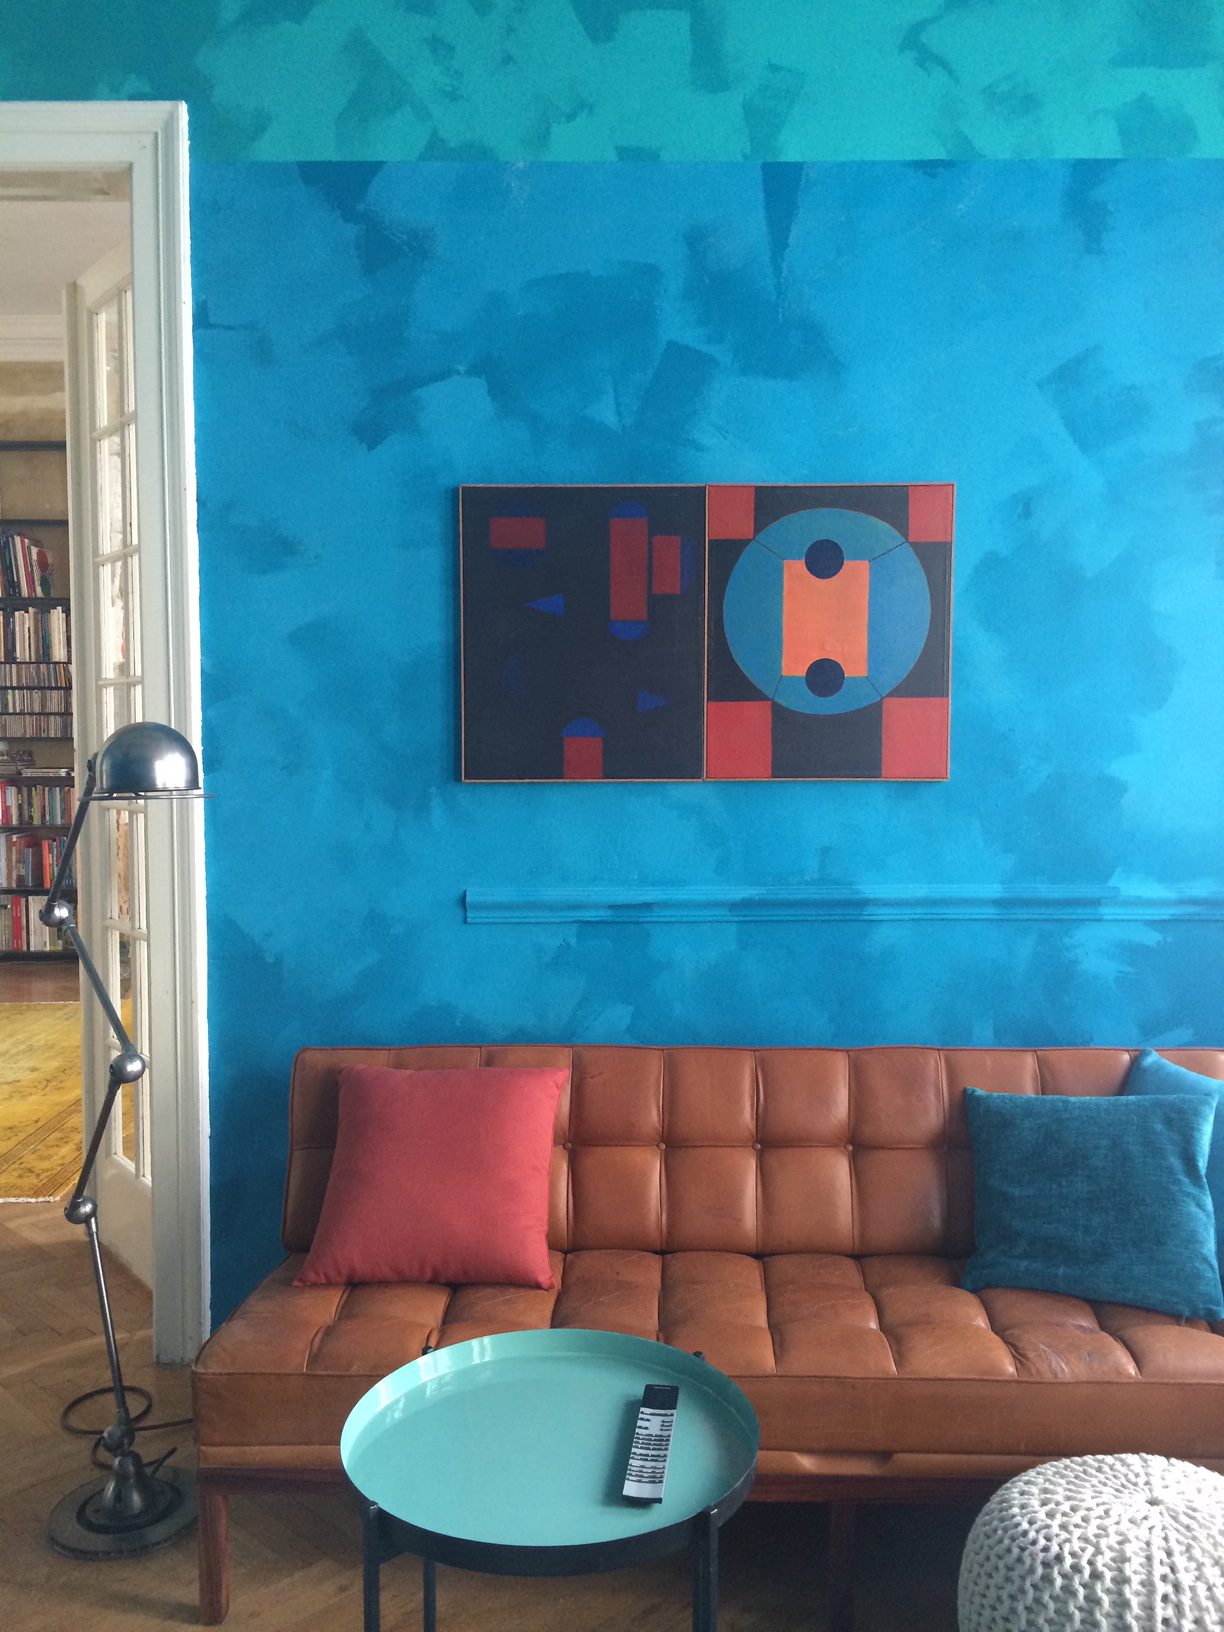 Brown couch in front of blue wall with picture